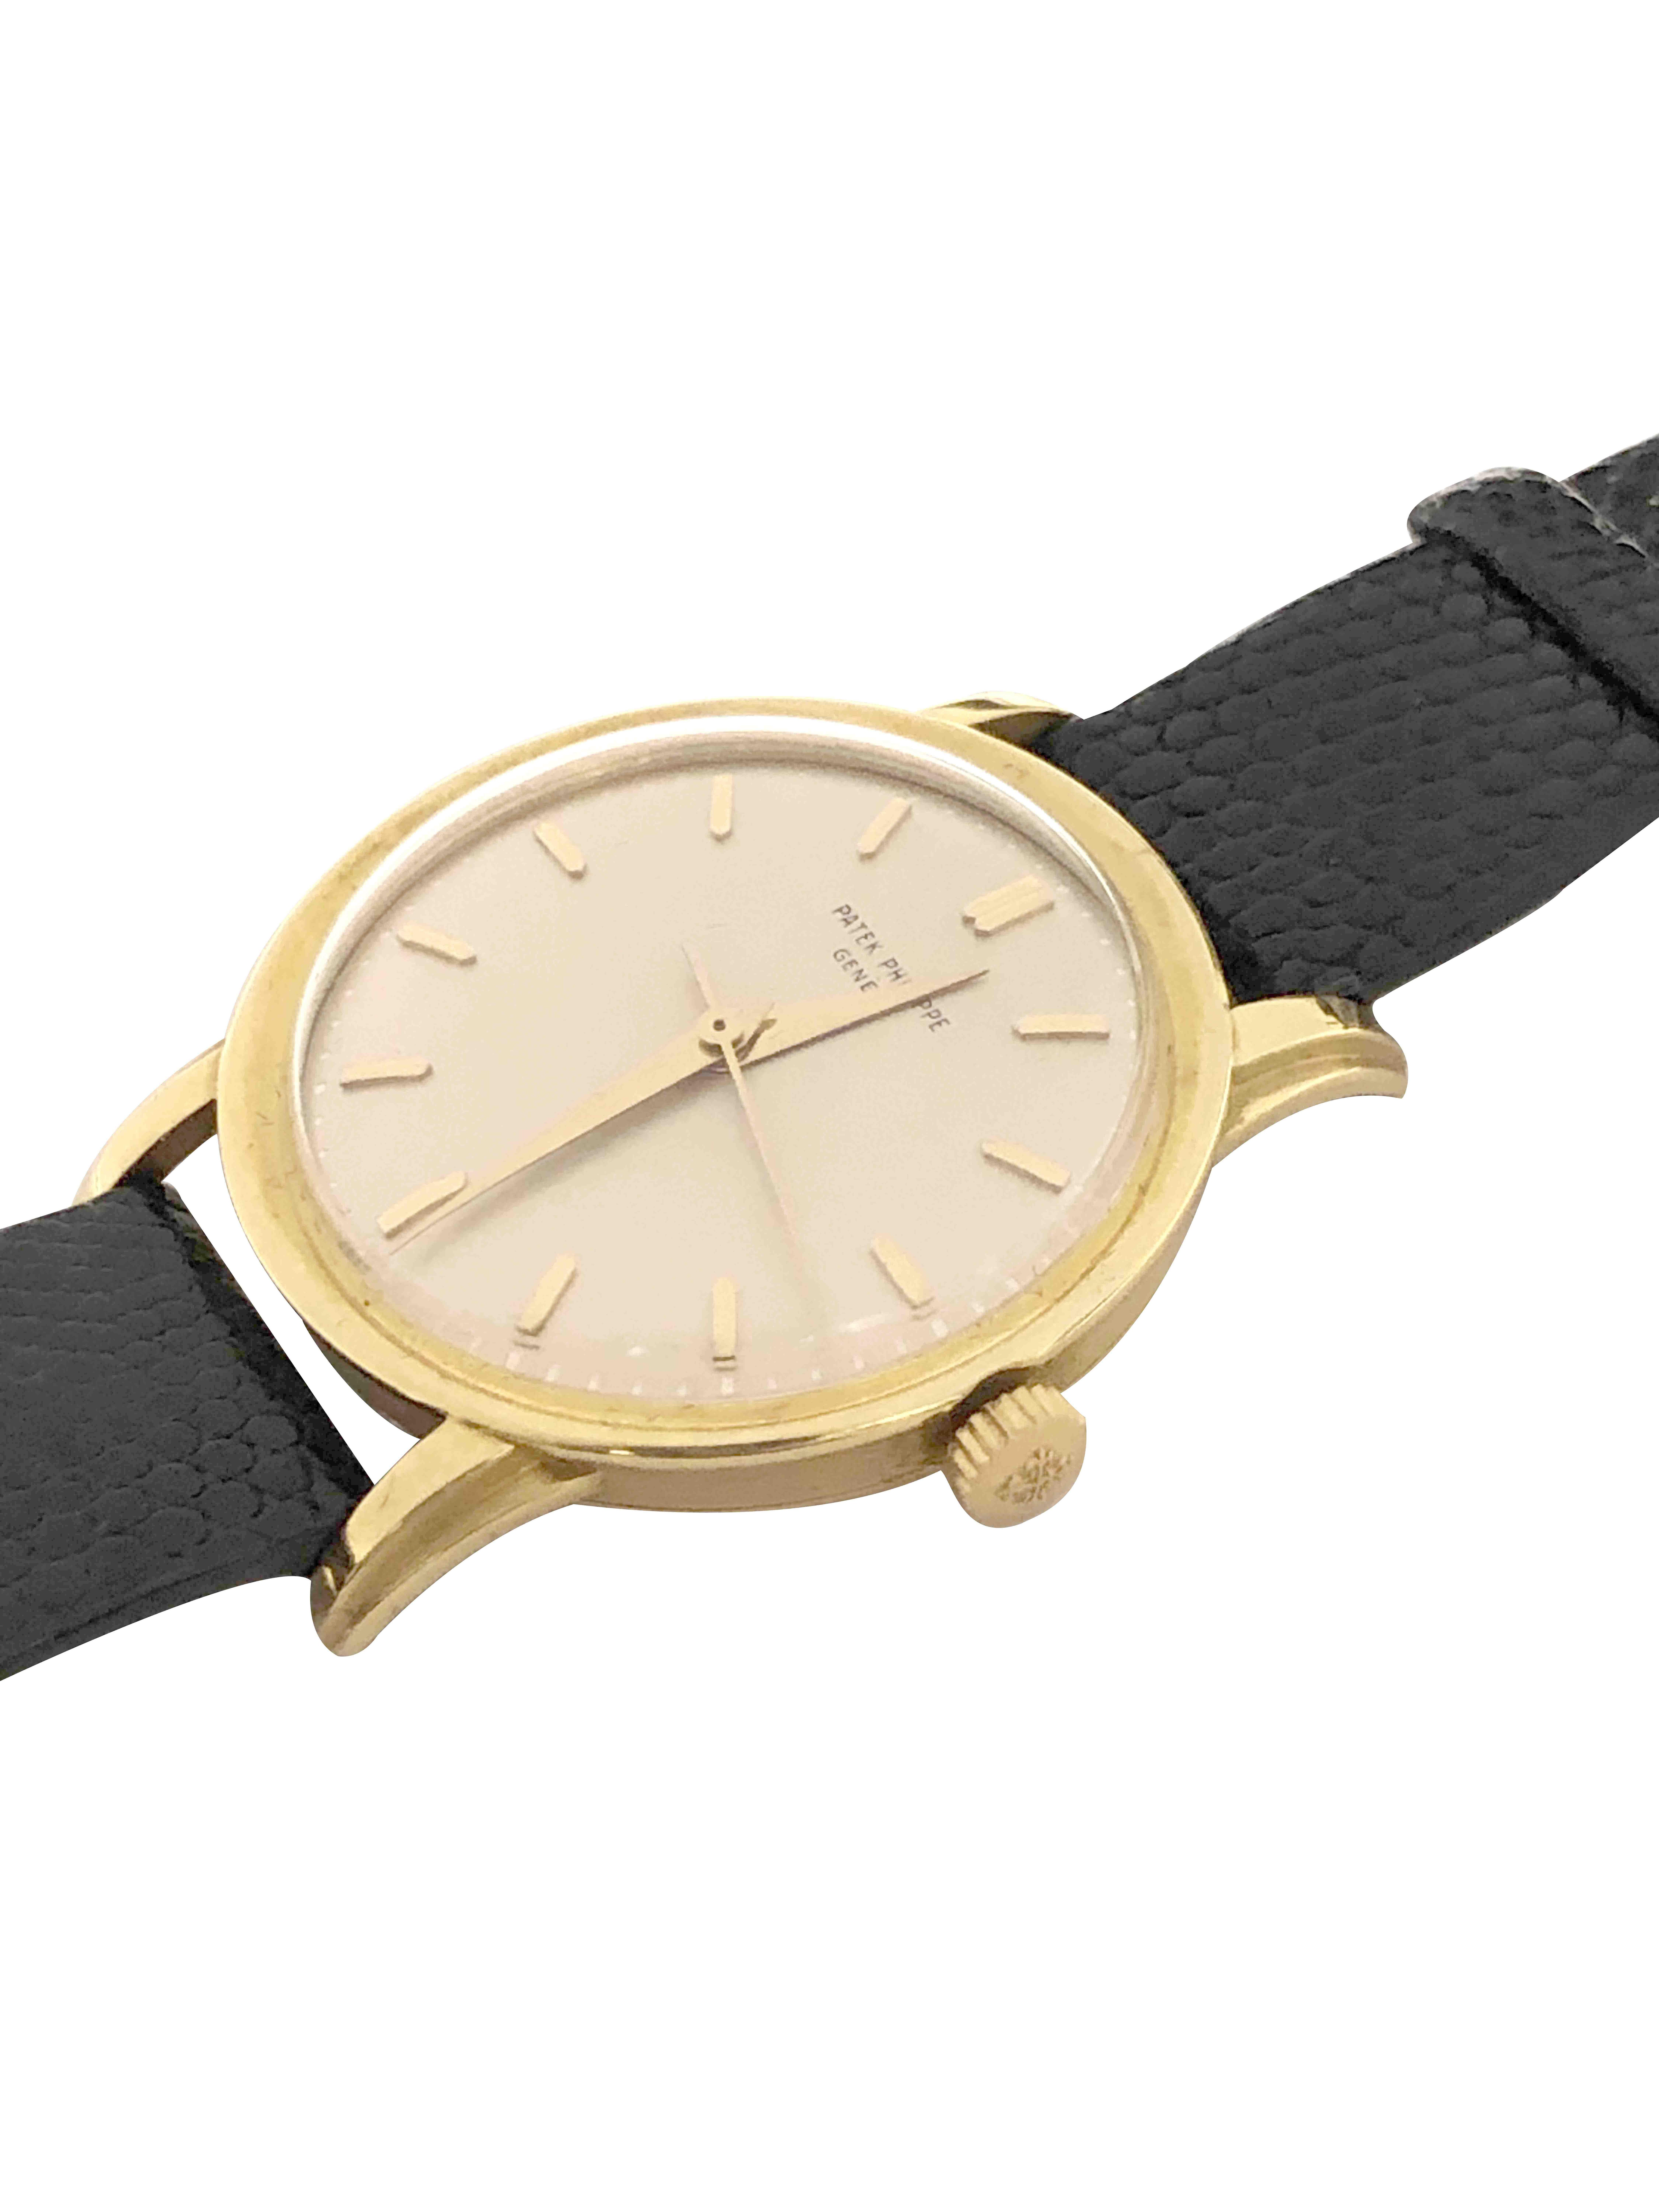 Circa 1950s Patek Philippe Reference 2481 Wrist watch, 37 M.M. 18K yellow Gold 2 piece case with stepped and curved lugs. 18 Jewel mechanical, Manual wind Nickle lever movement. Excellent, original mint condition Silver satin Dial with raised Gold